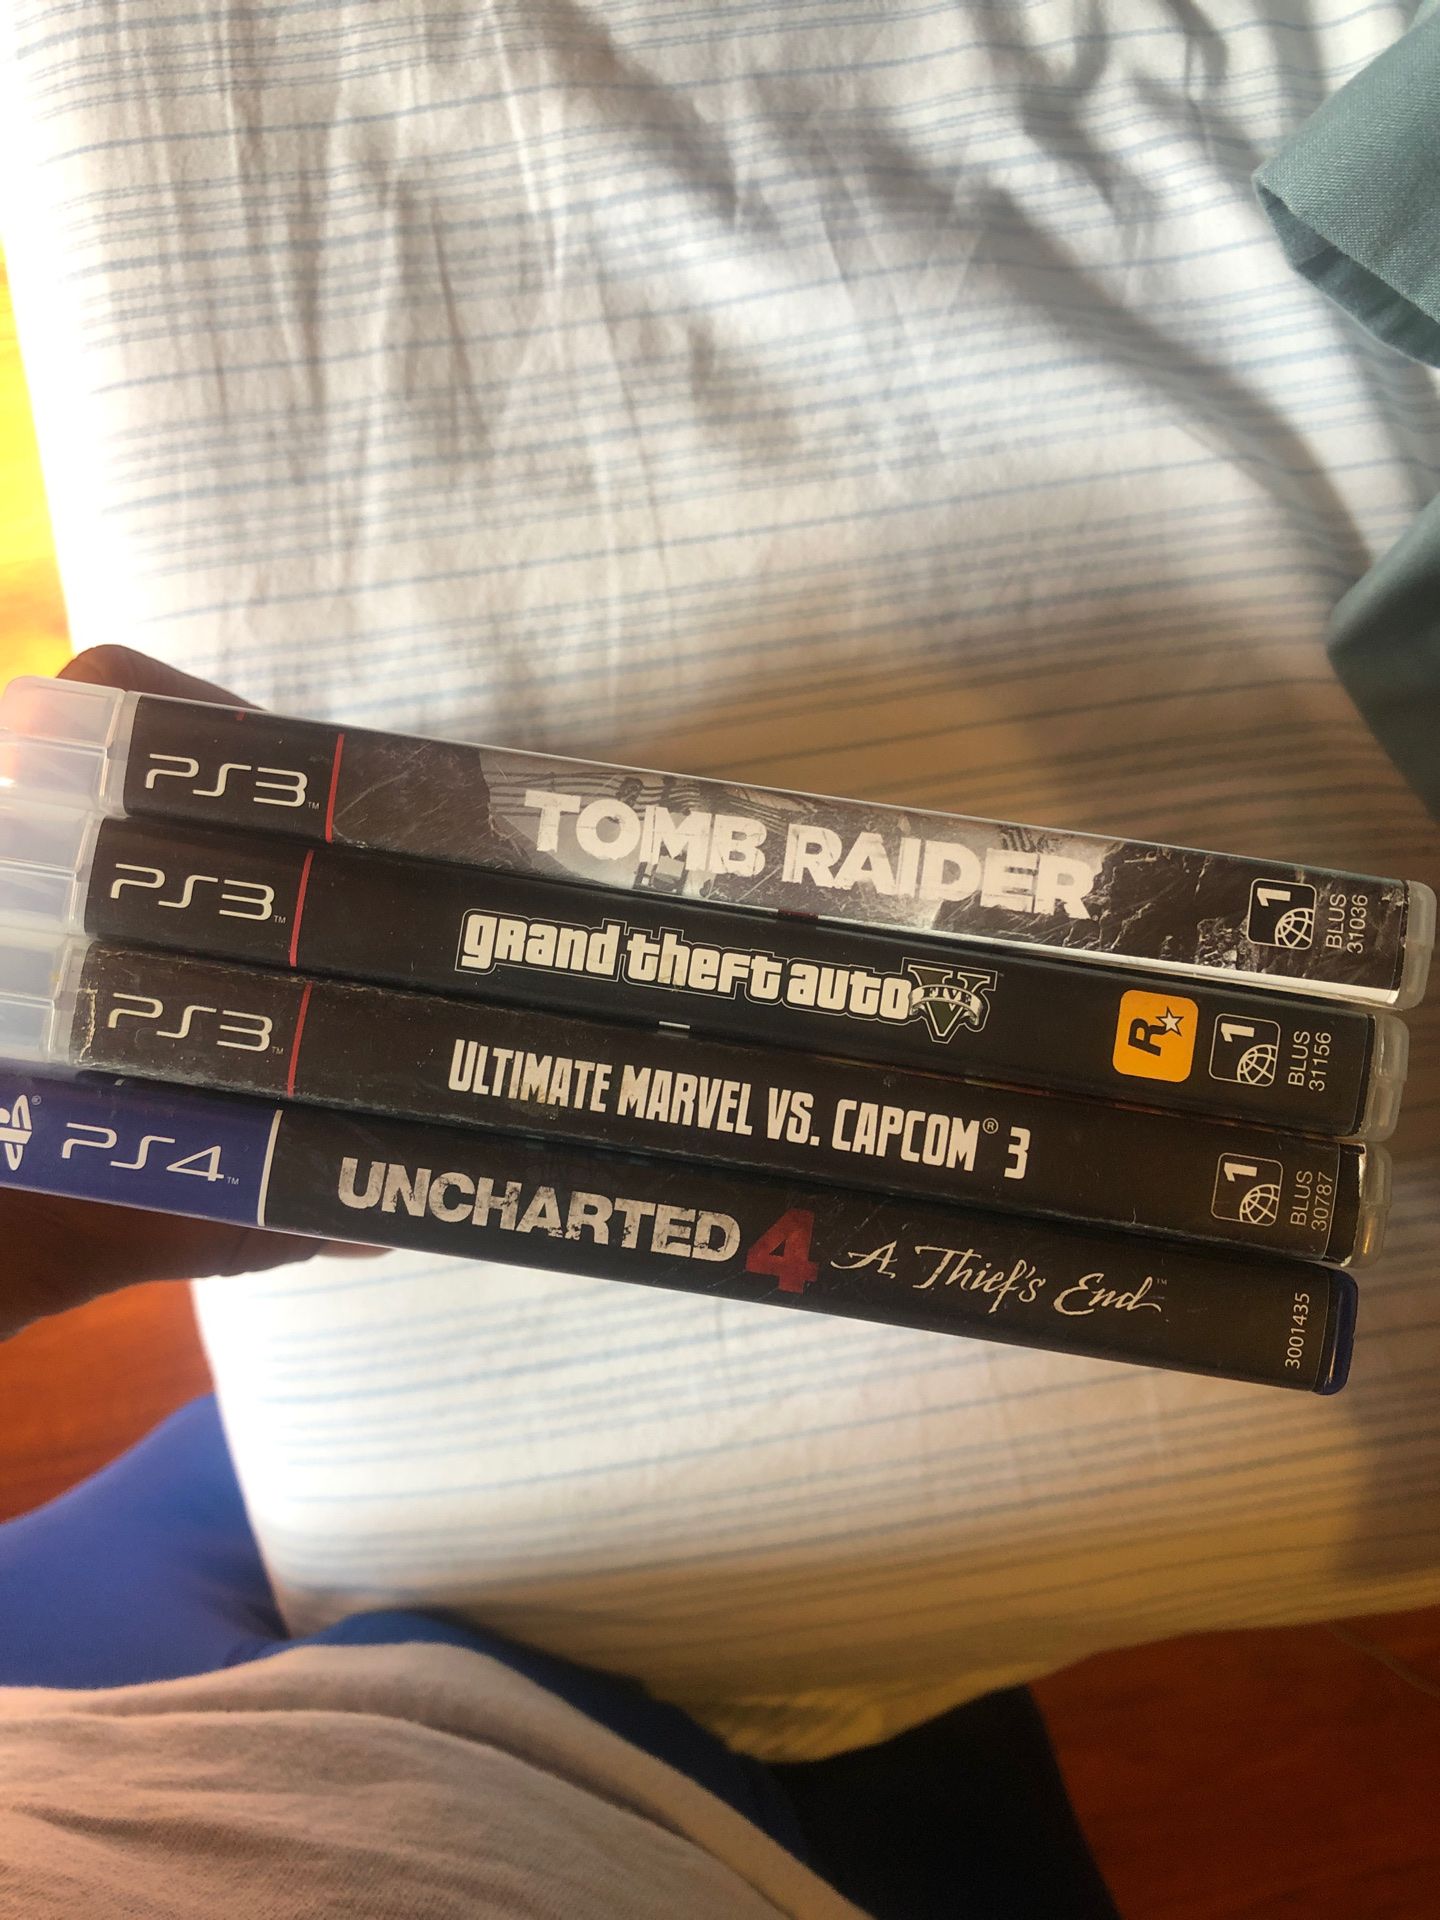 3 PS3 and 1 ps4 game